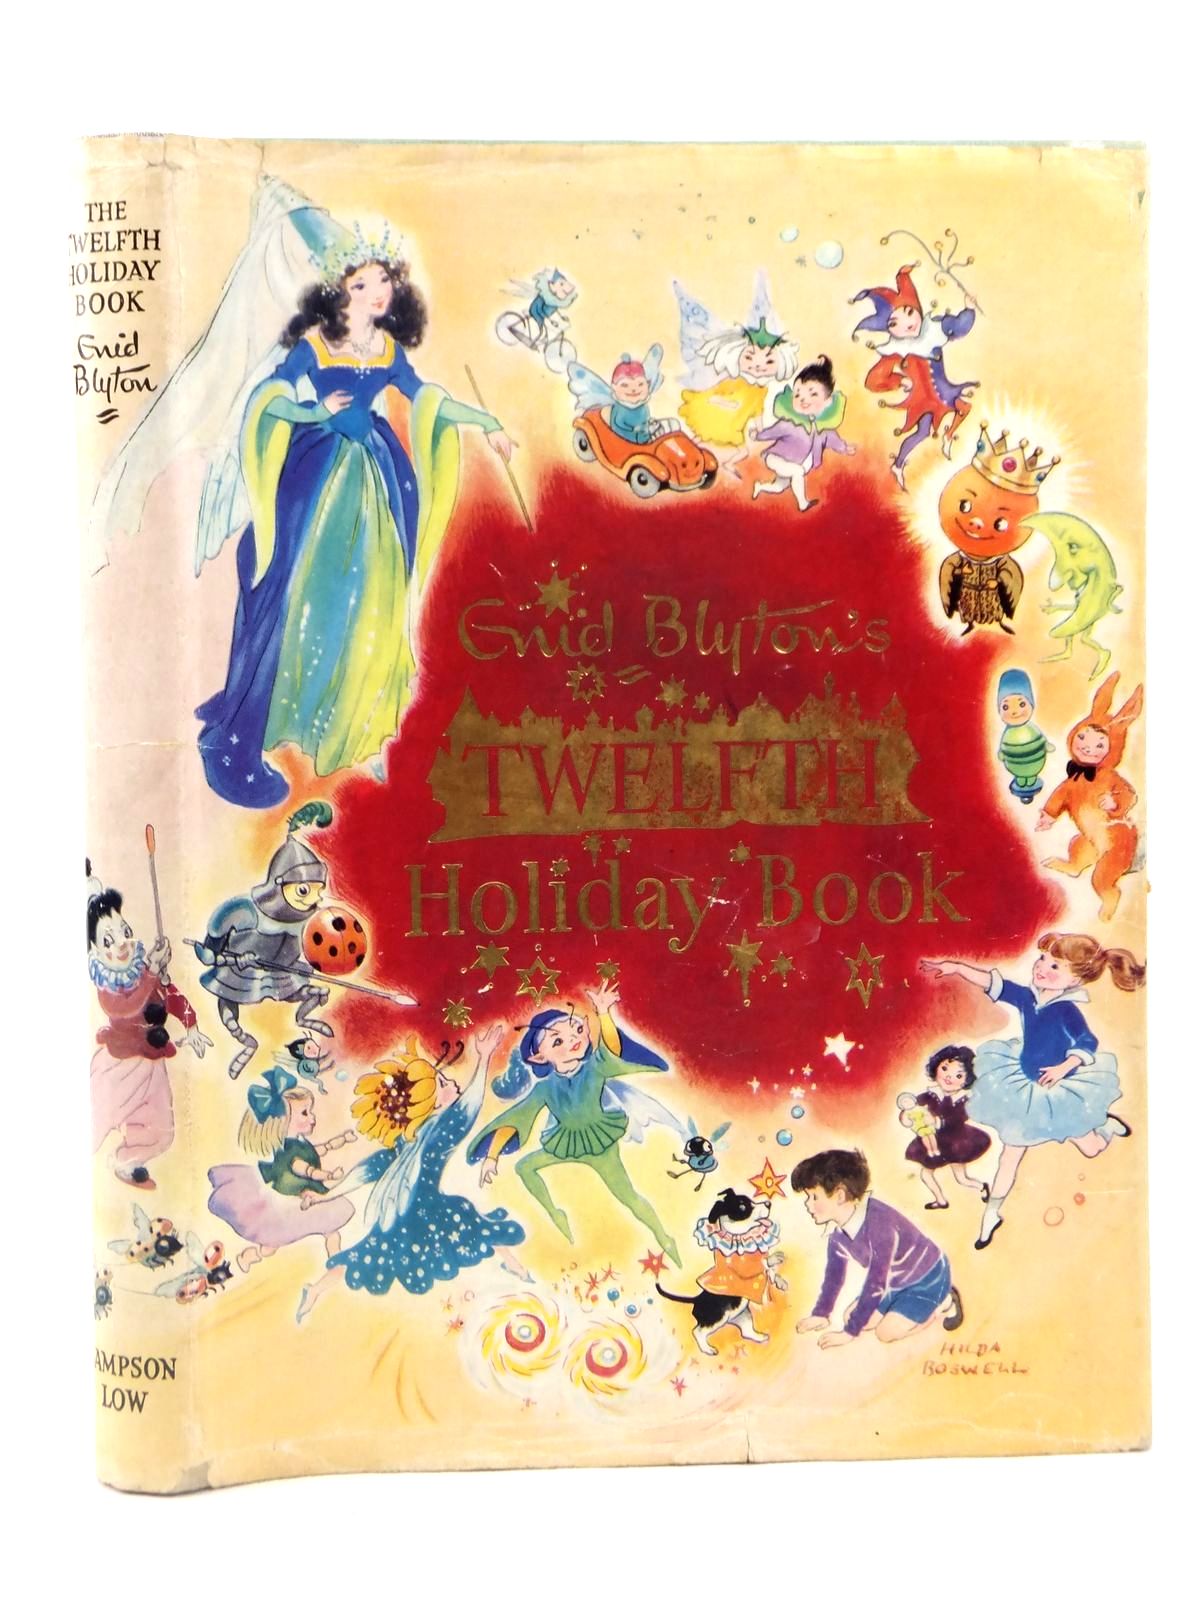 Cover of THE TWELFTH HOLIDAY BOOK by Enid Blyton